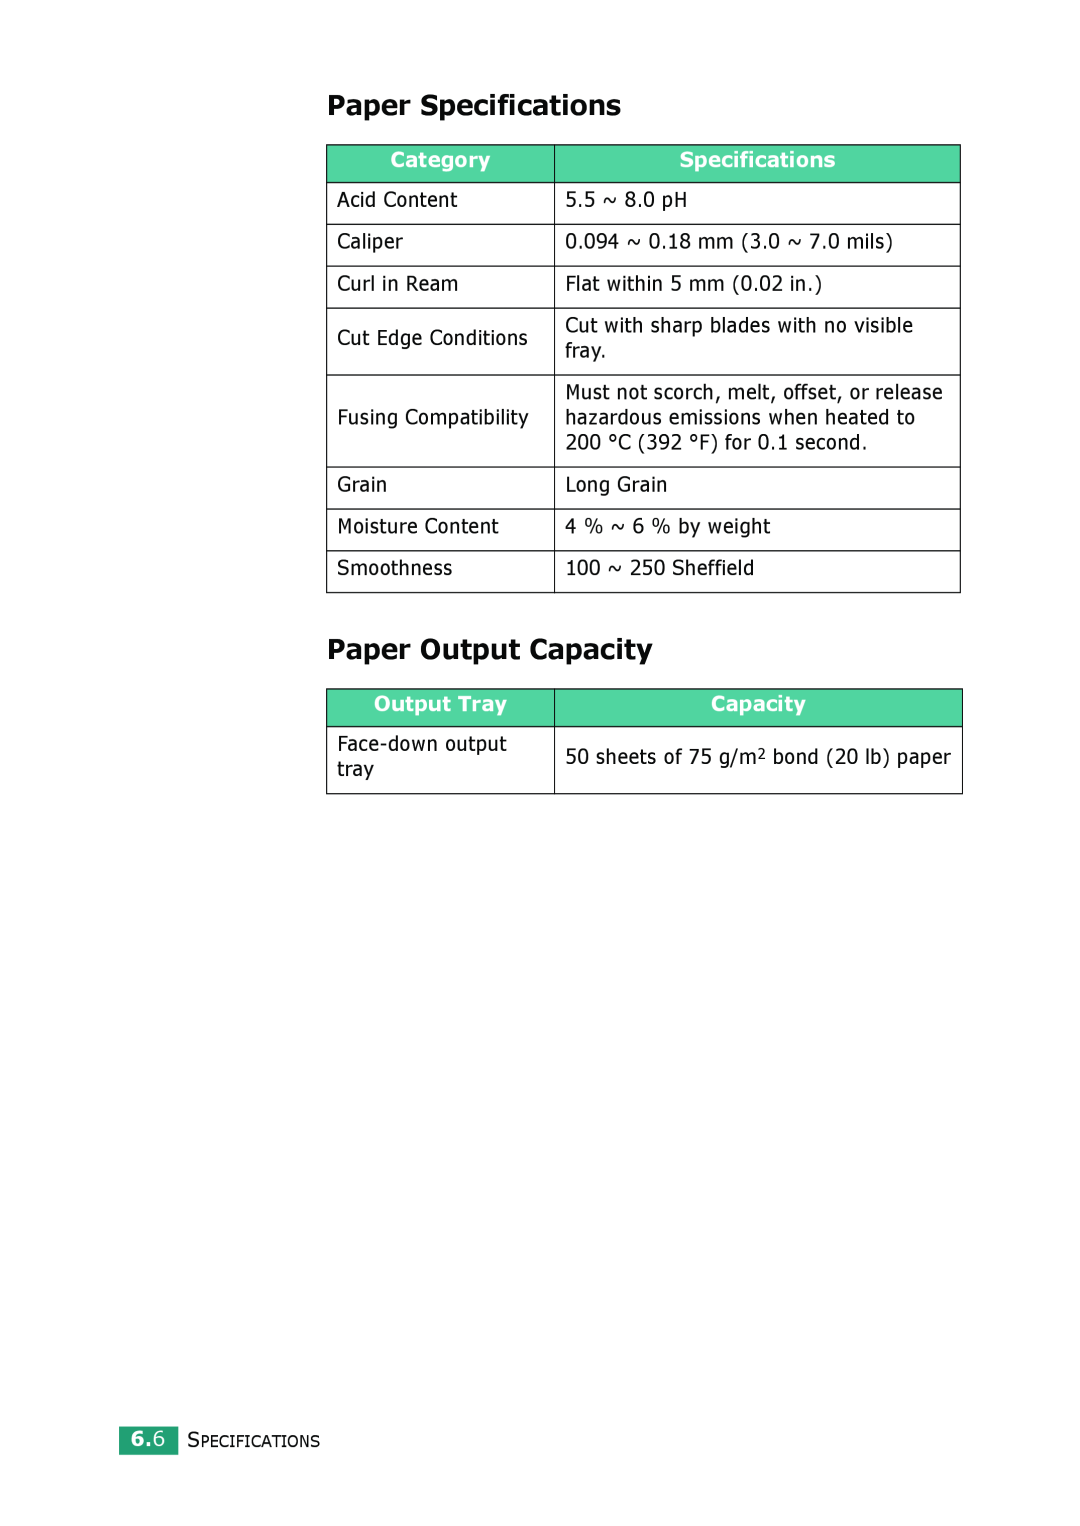 Samsung ML-1610 manual Paper Specifications, Paper Output Capacity, Category, Output Tray 